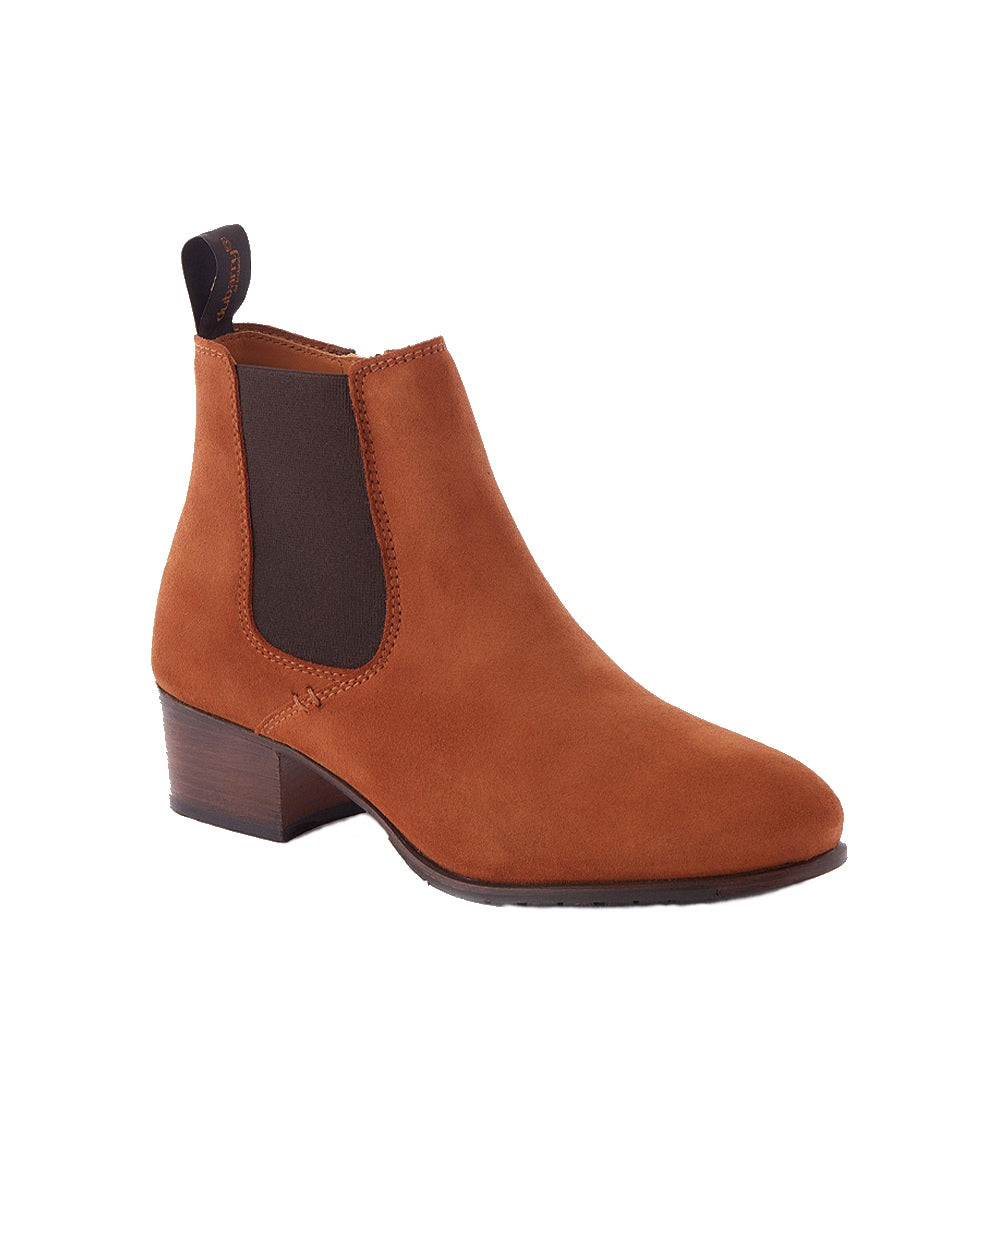 Dubarry Bray Chelsea Boots in Camel 